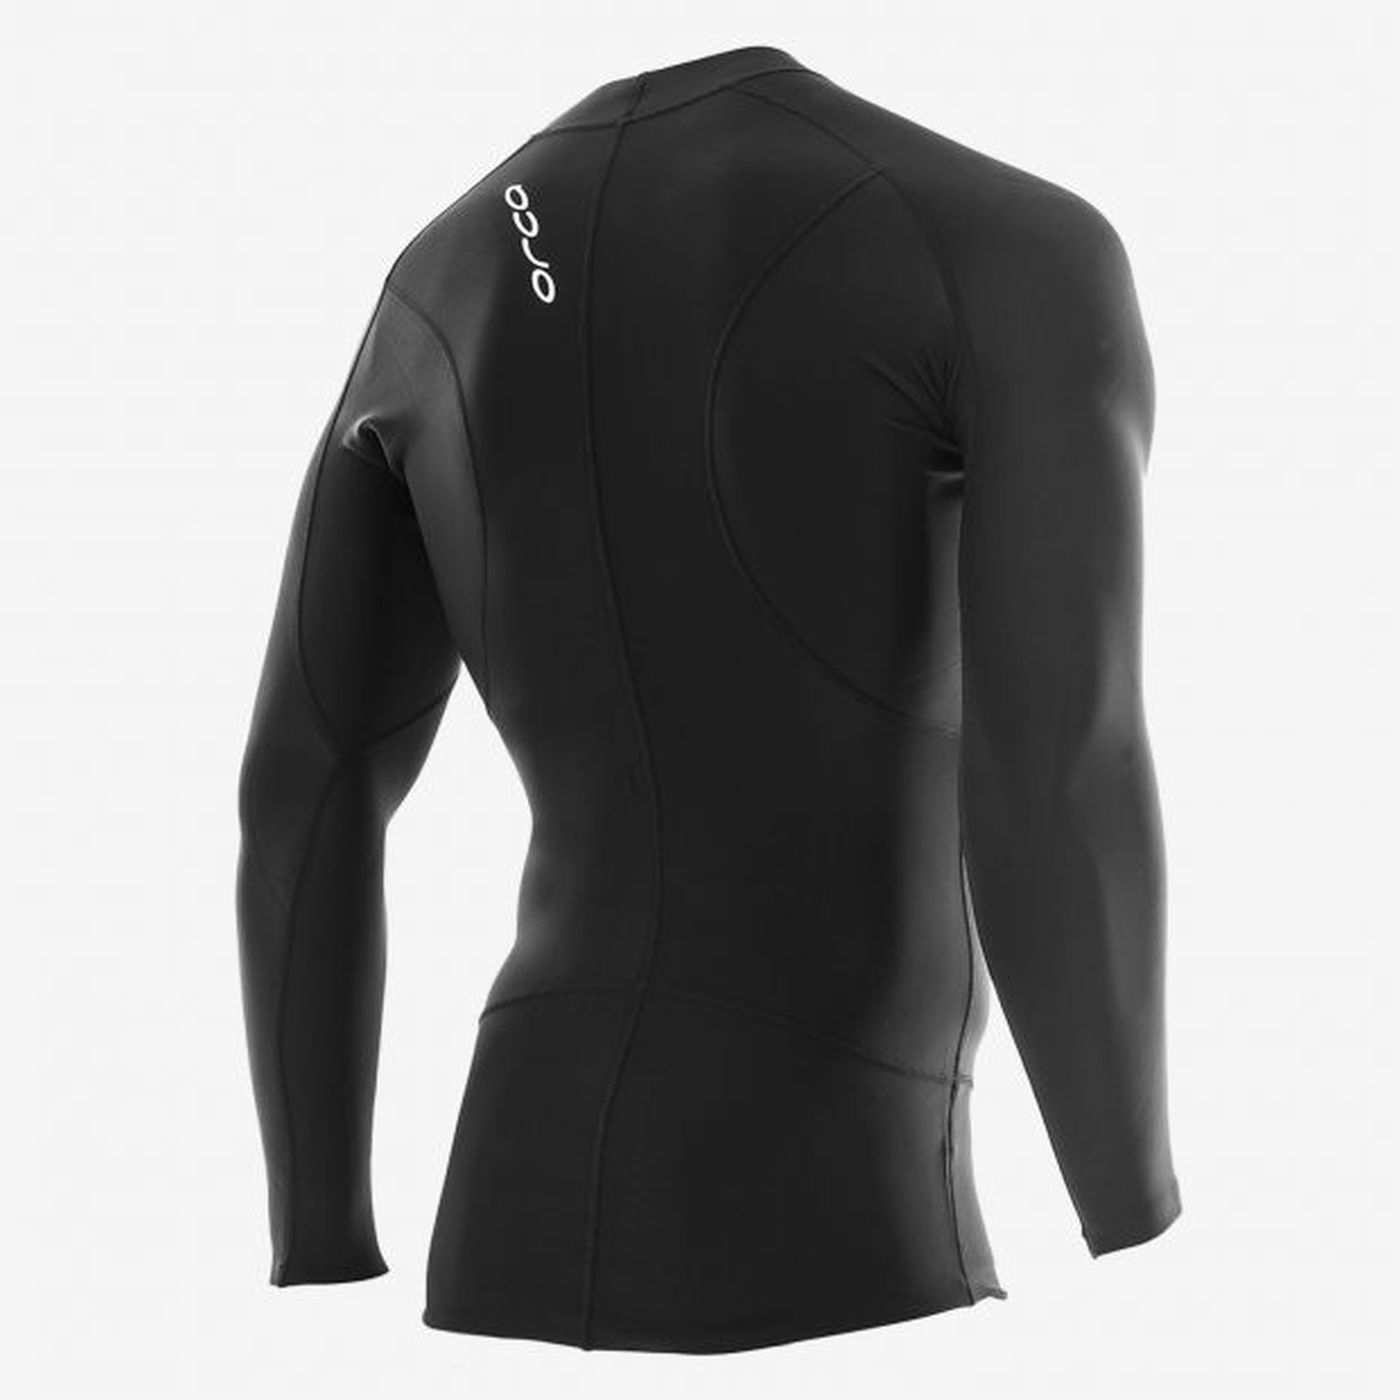 Orca Neoprene Unisex Wetsuit Base Layer - Tri & Openwater Wetsuits ...